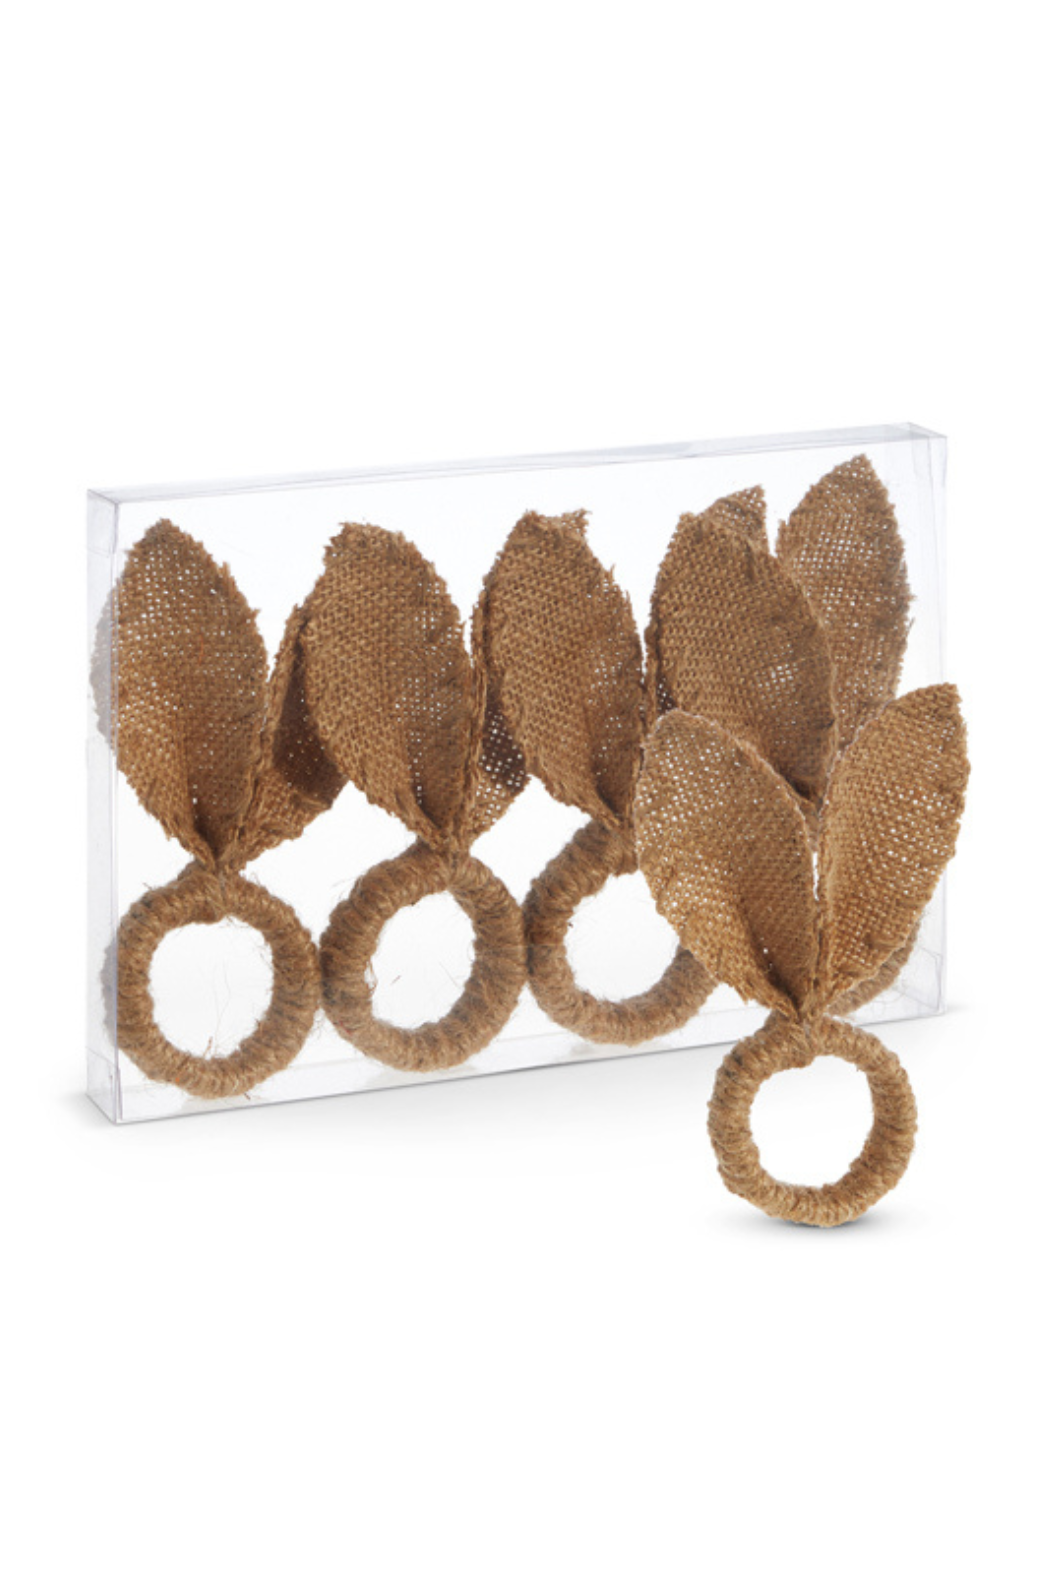 Personalized Wooden Christmas Napkin Rings-Natural - On Sale Today!